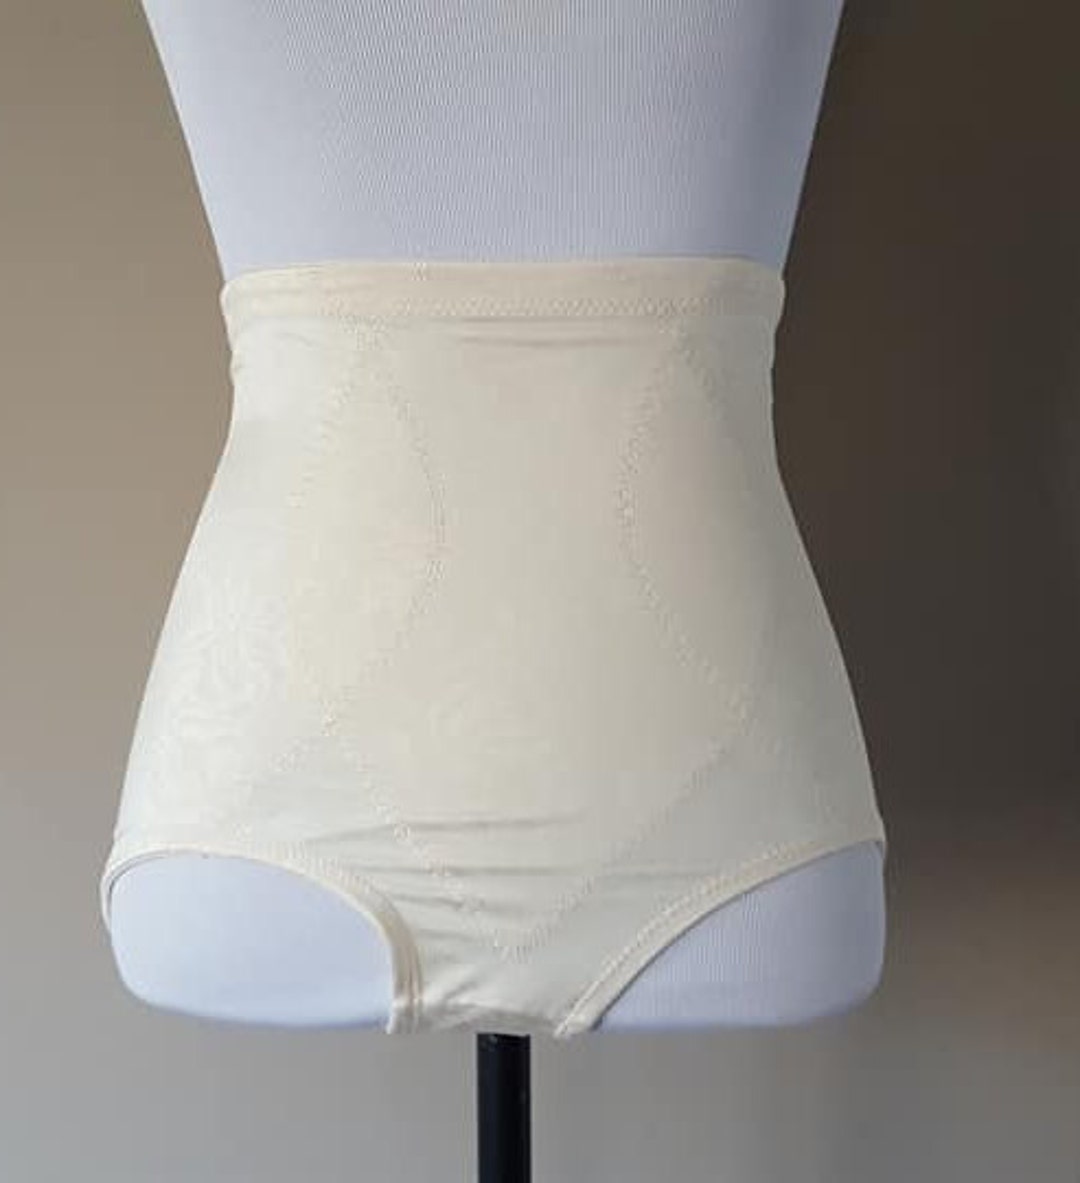 High Waisted Panty Girdle Extra Large Maidenform Flexees Firm